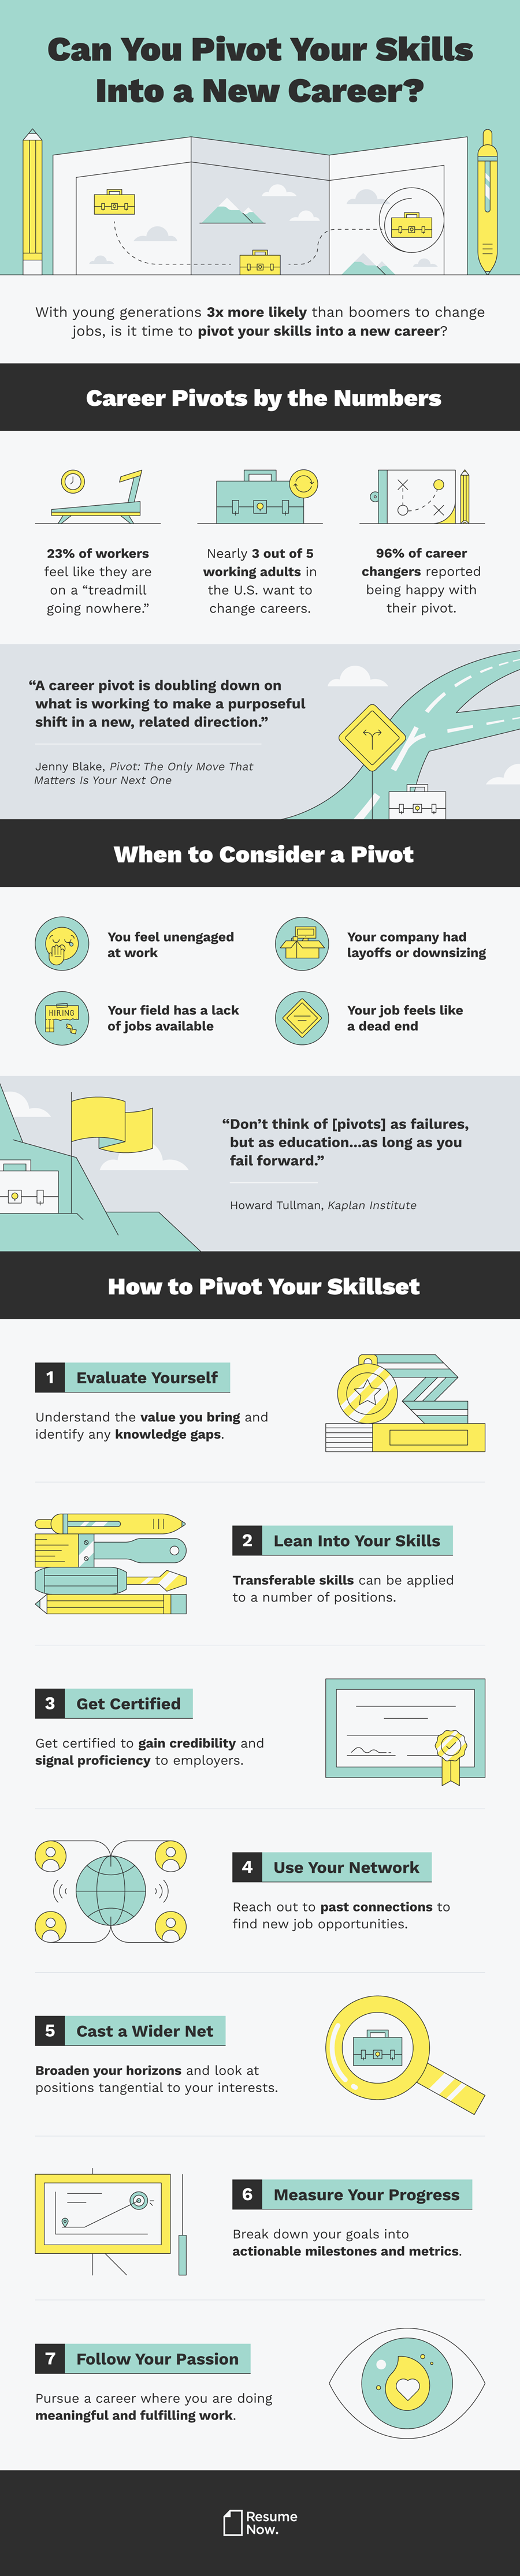 An infographic on how to pivot into a new career